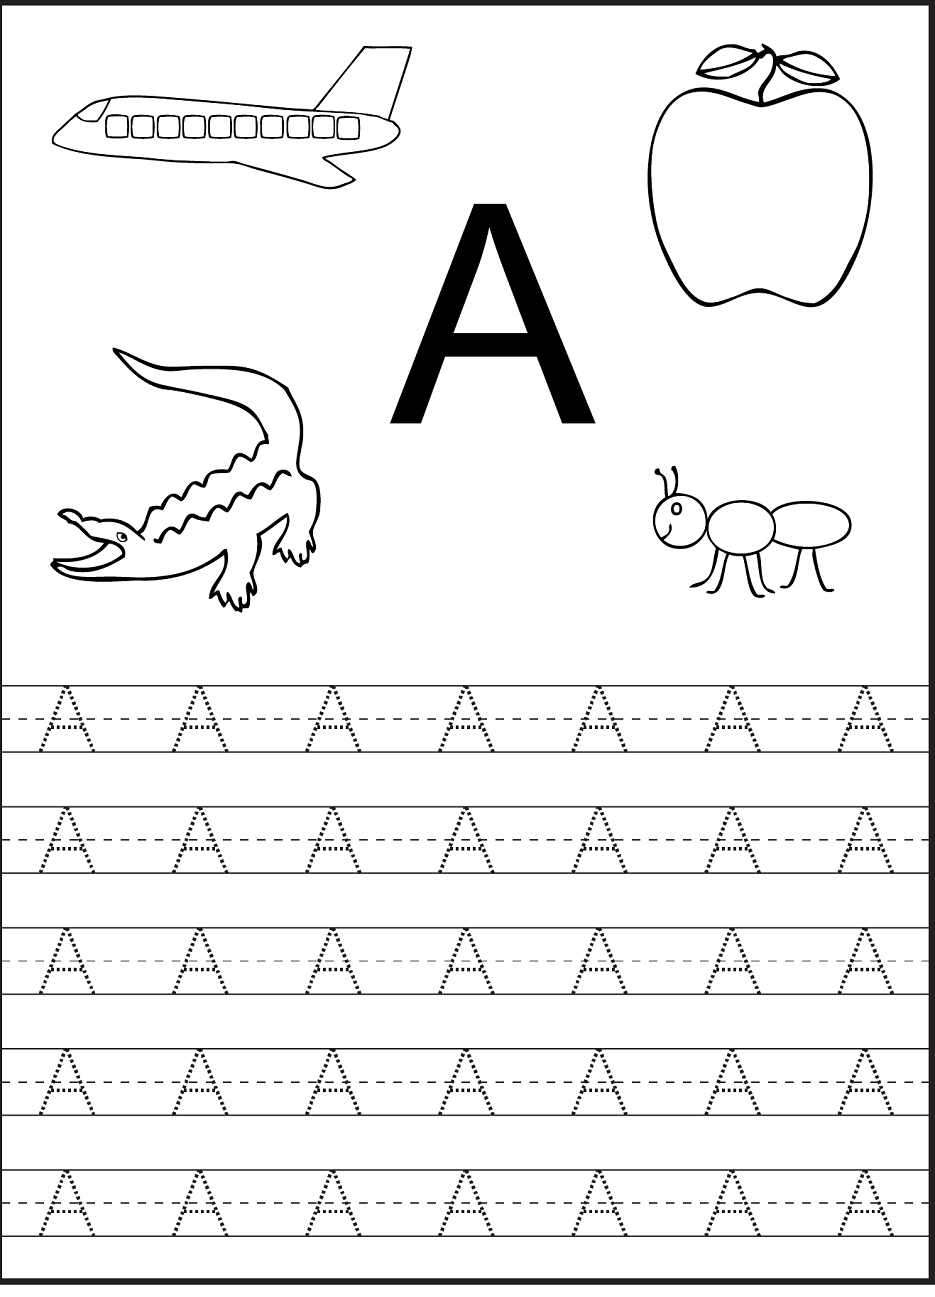 Tracing The Letter A Free Printable | Preschool Worksheets regarding Free Printable Tracing Letters